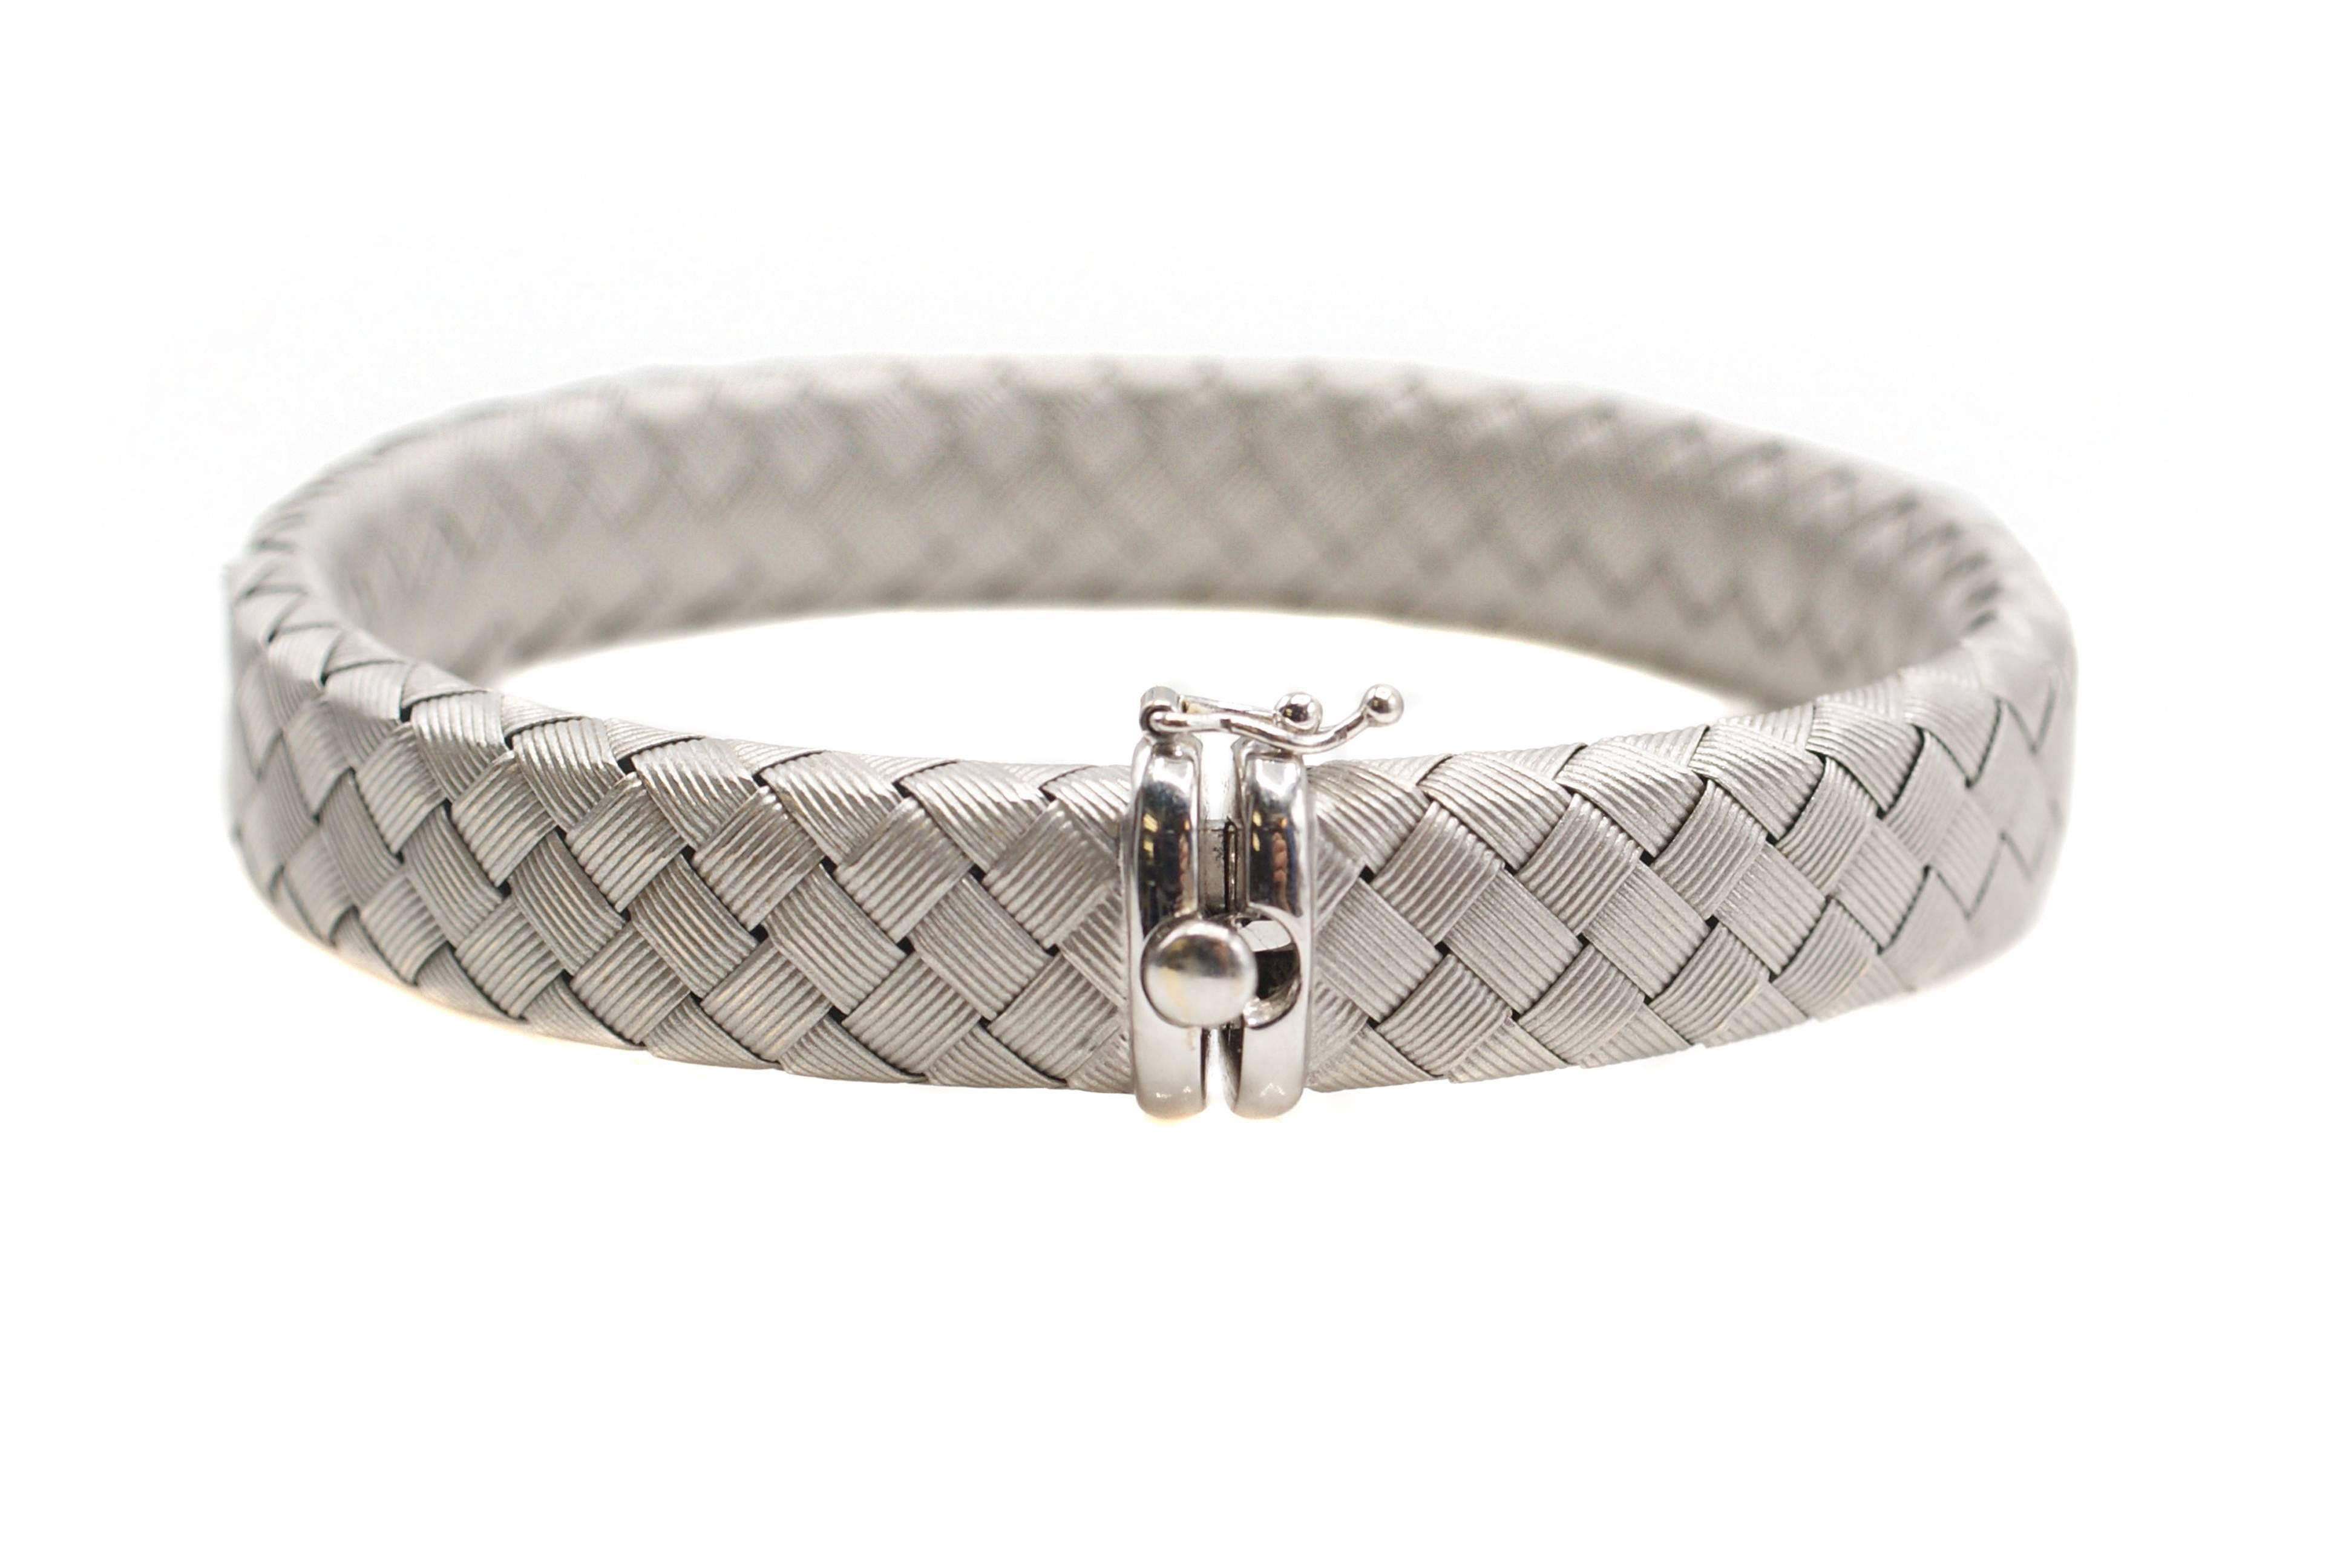 This gorgeous and chic Italian flexible bangle bracelet was masterfully handcrafted by Italian jewelers with a crisscross woven pattern. Just the right tone of this 18 karat white gold and the high polish lets this elegant bracelet reflect the light